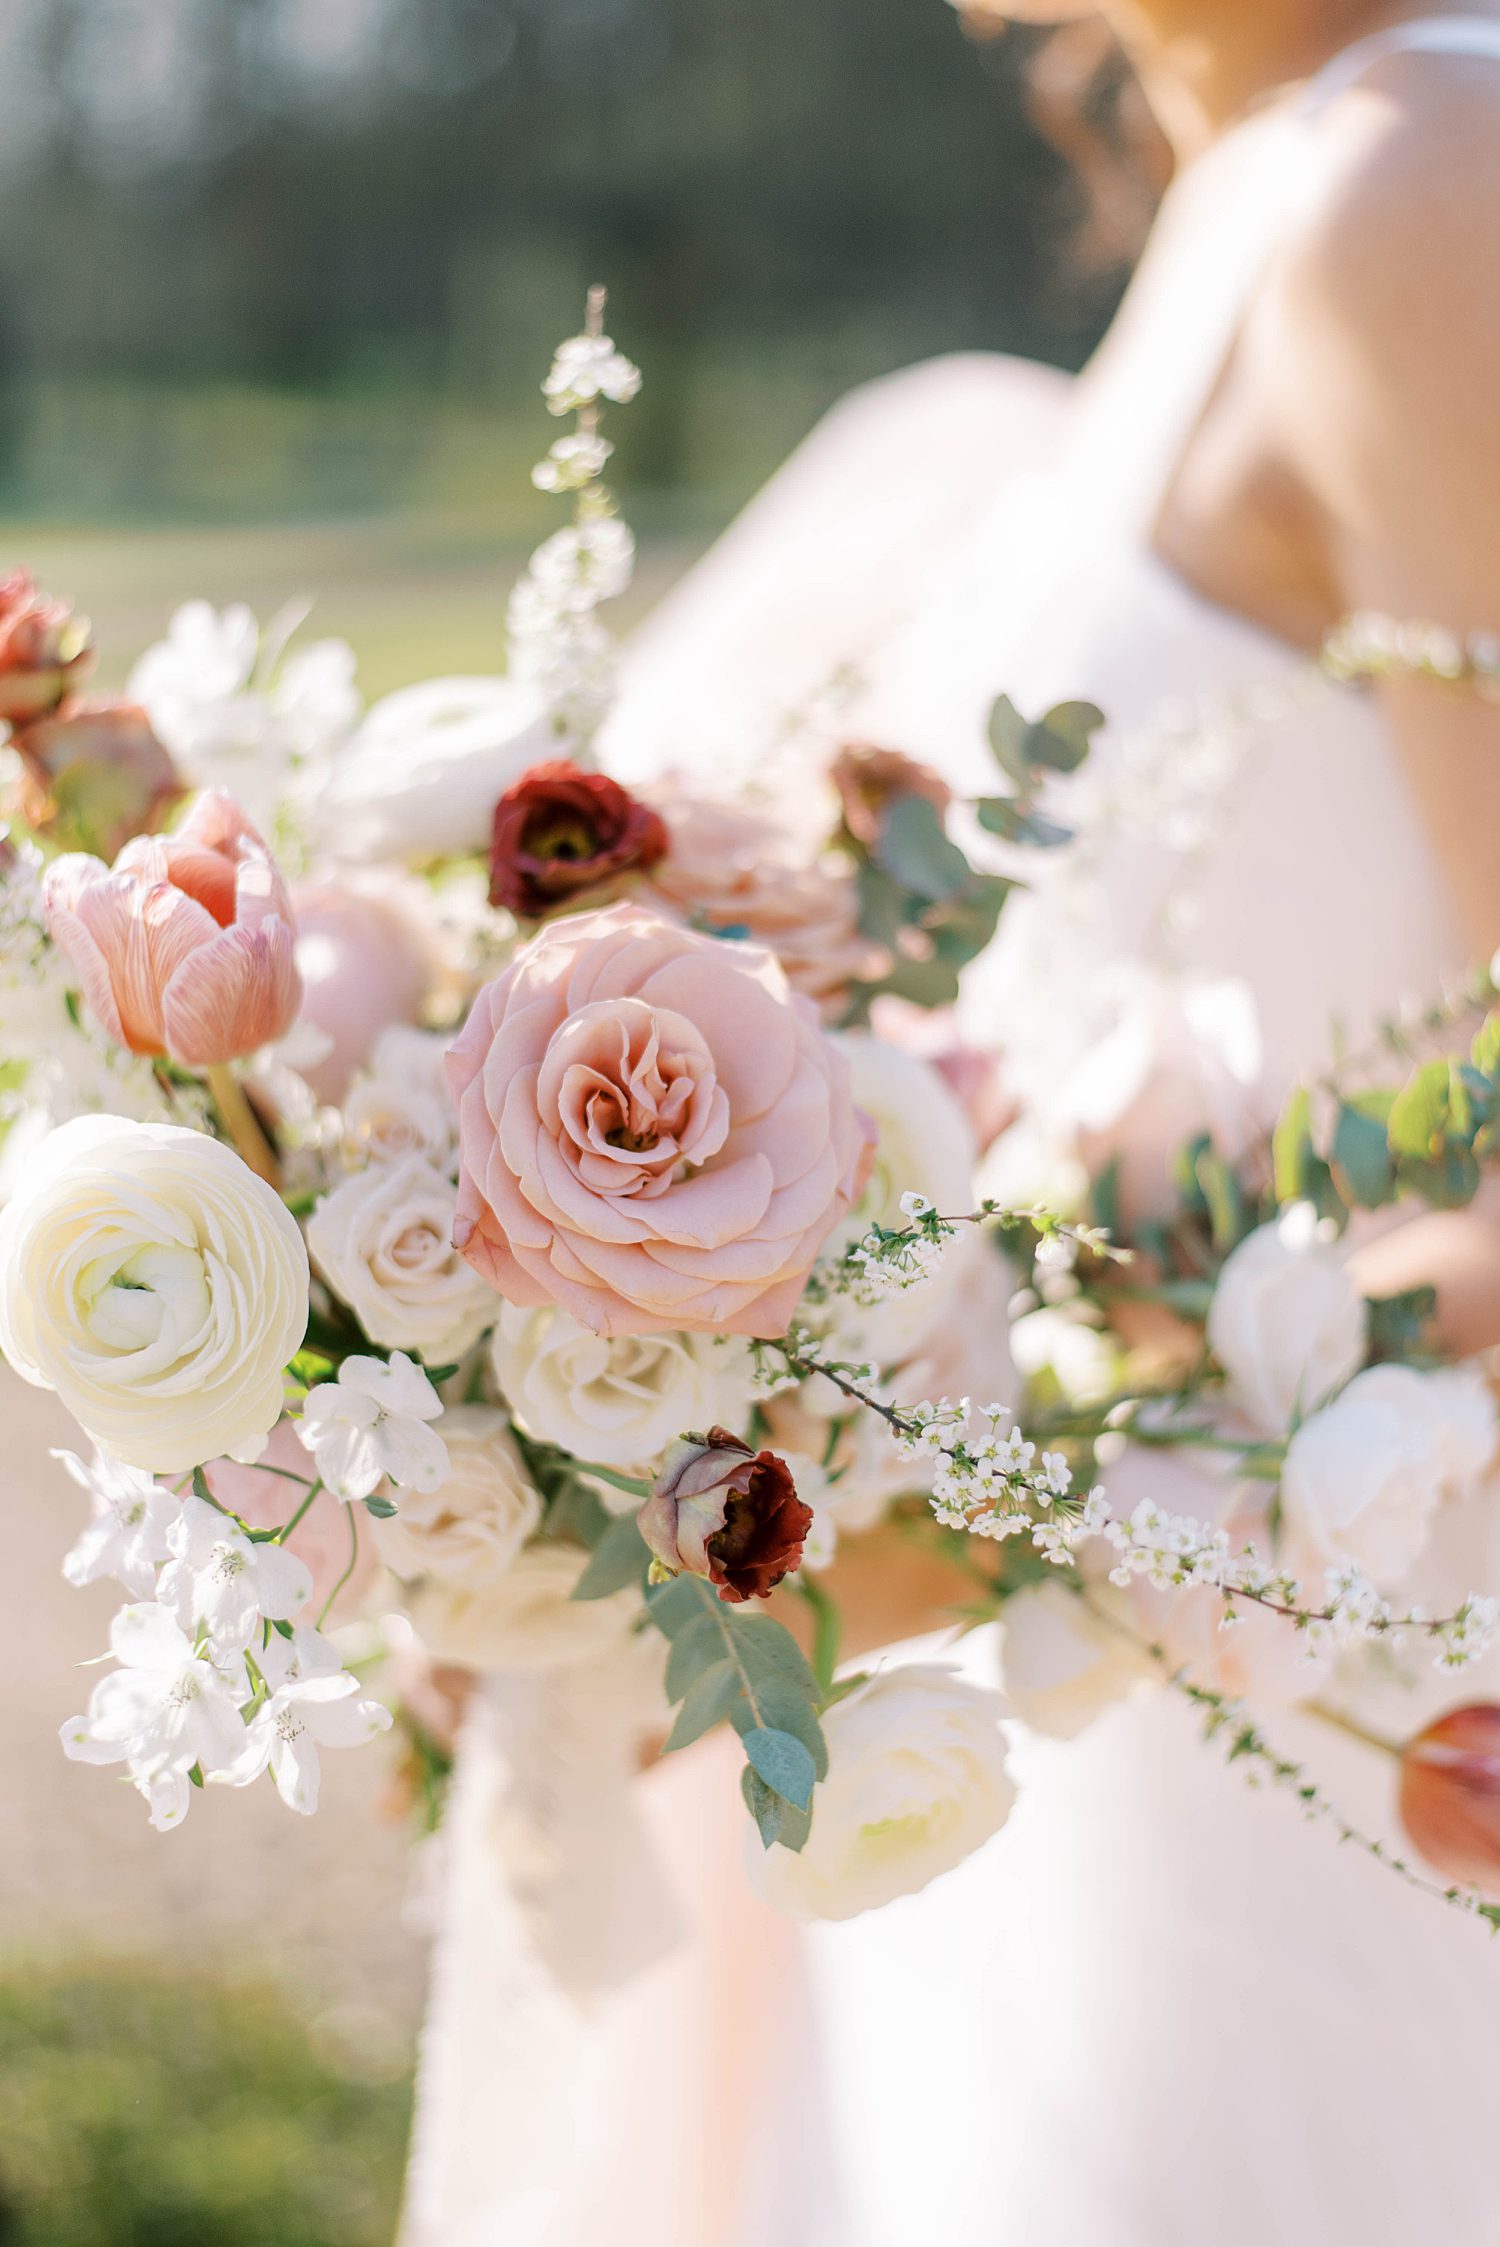 bride's pink and white bouquet for spring wedding day in France